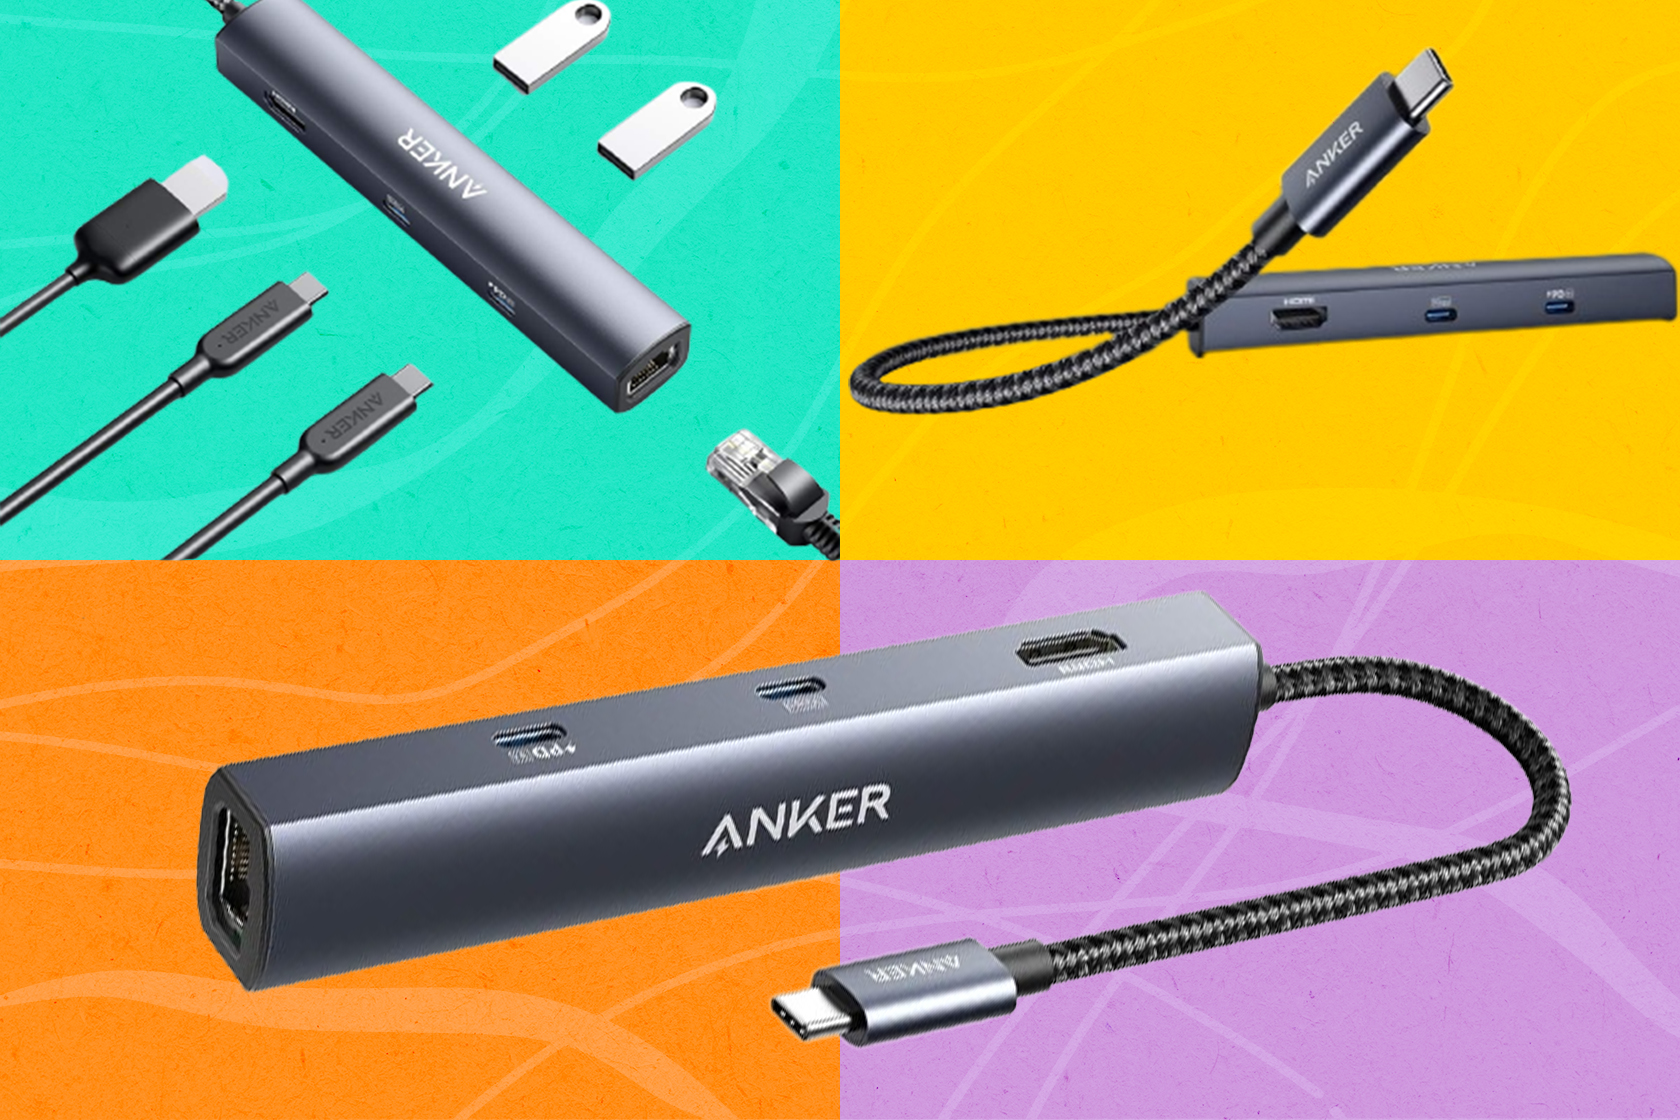 This Anker USB-C hub is 44% off today, thanks to